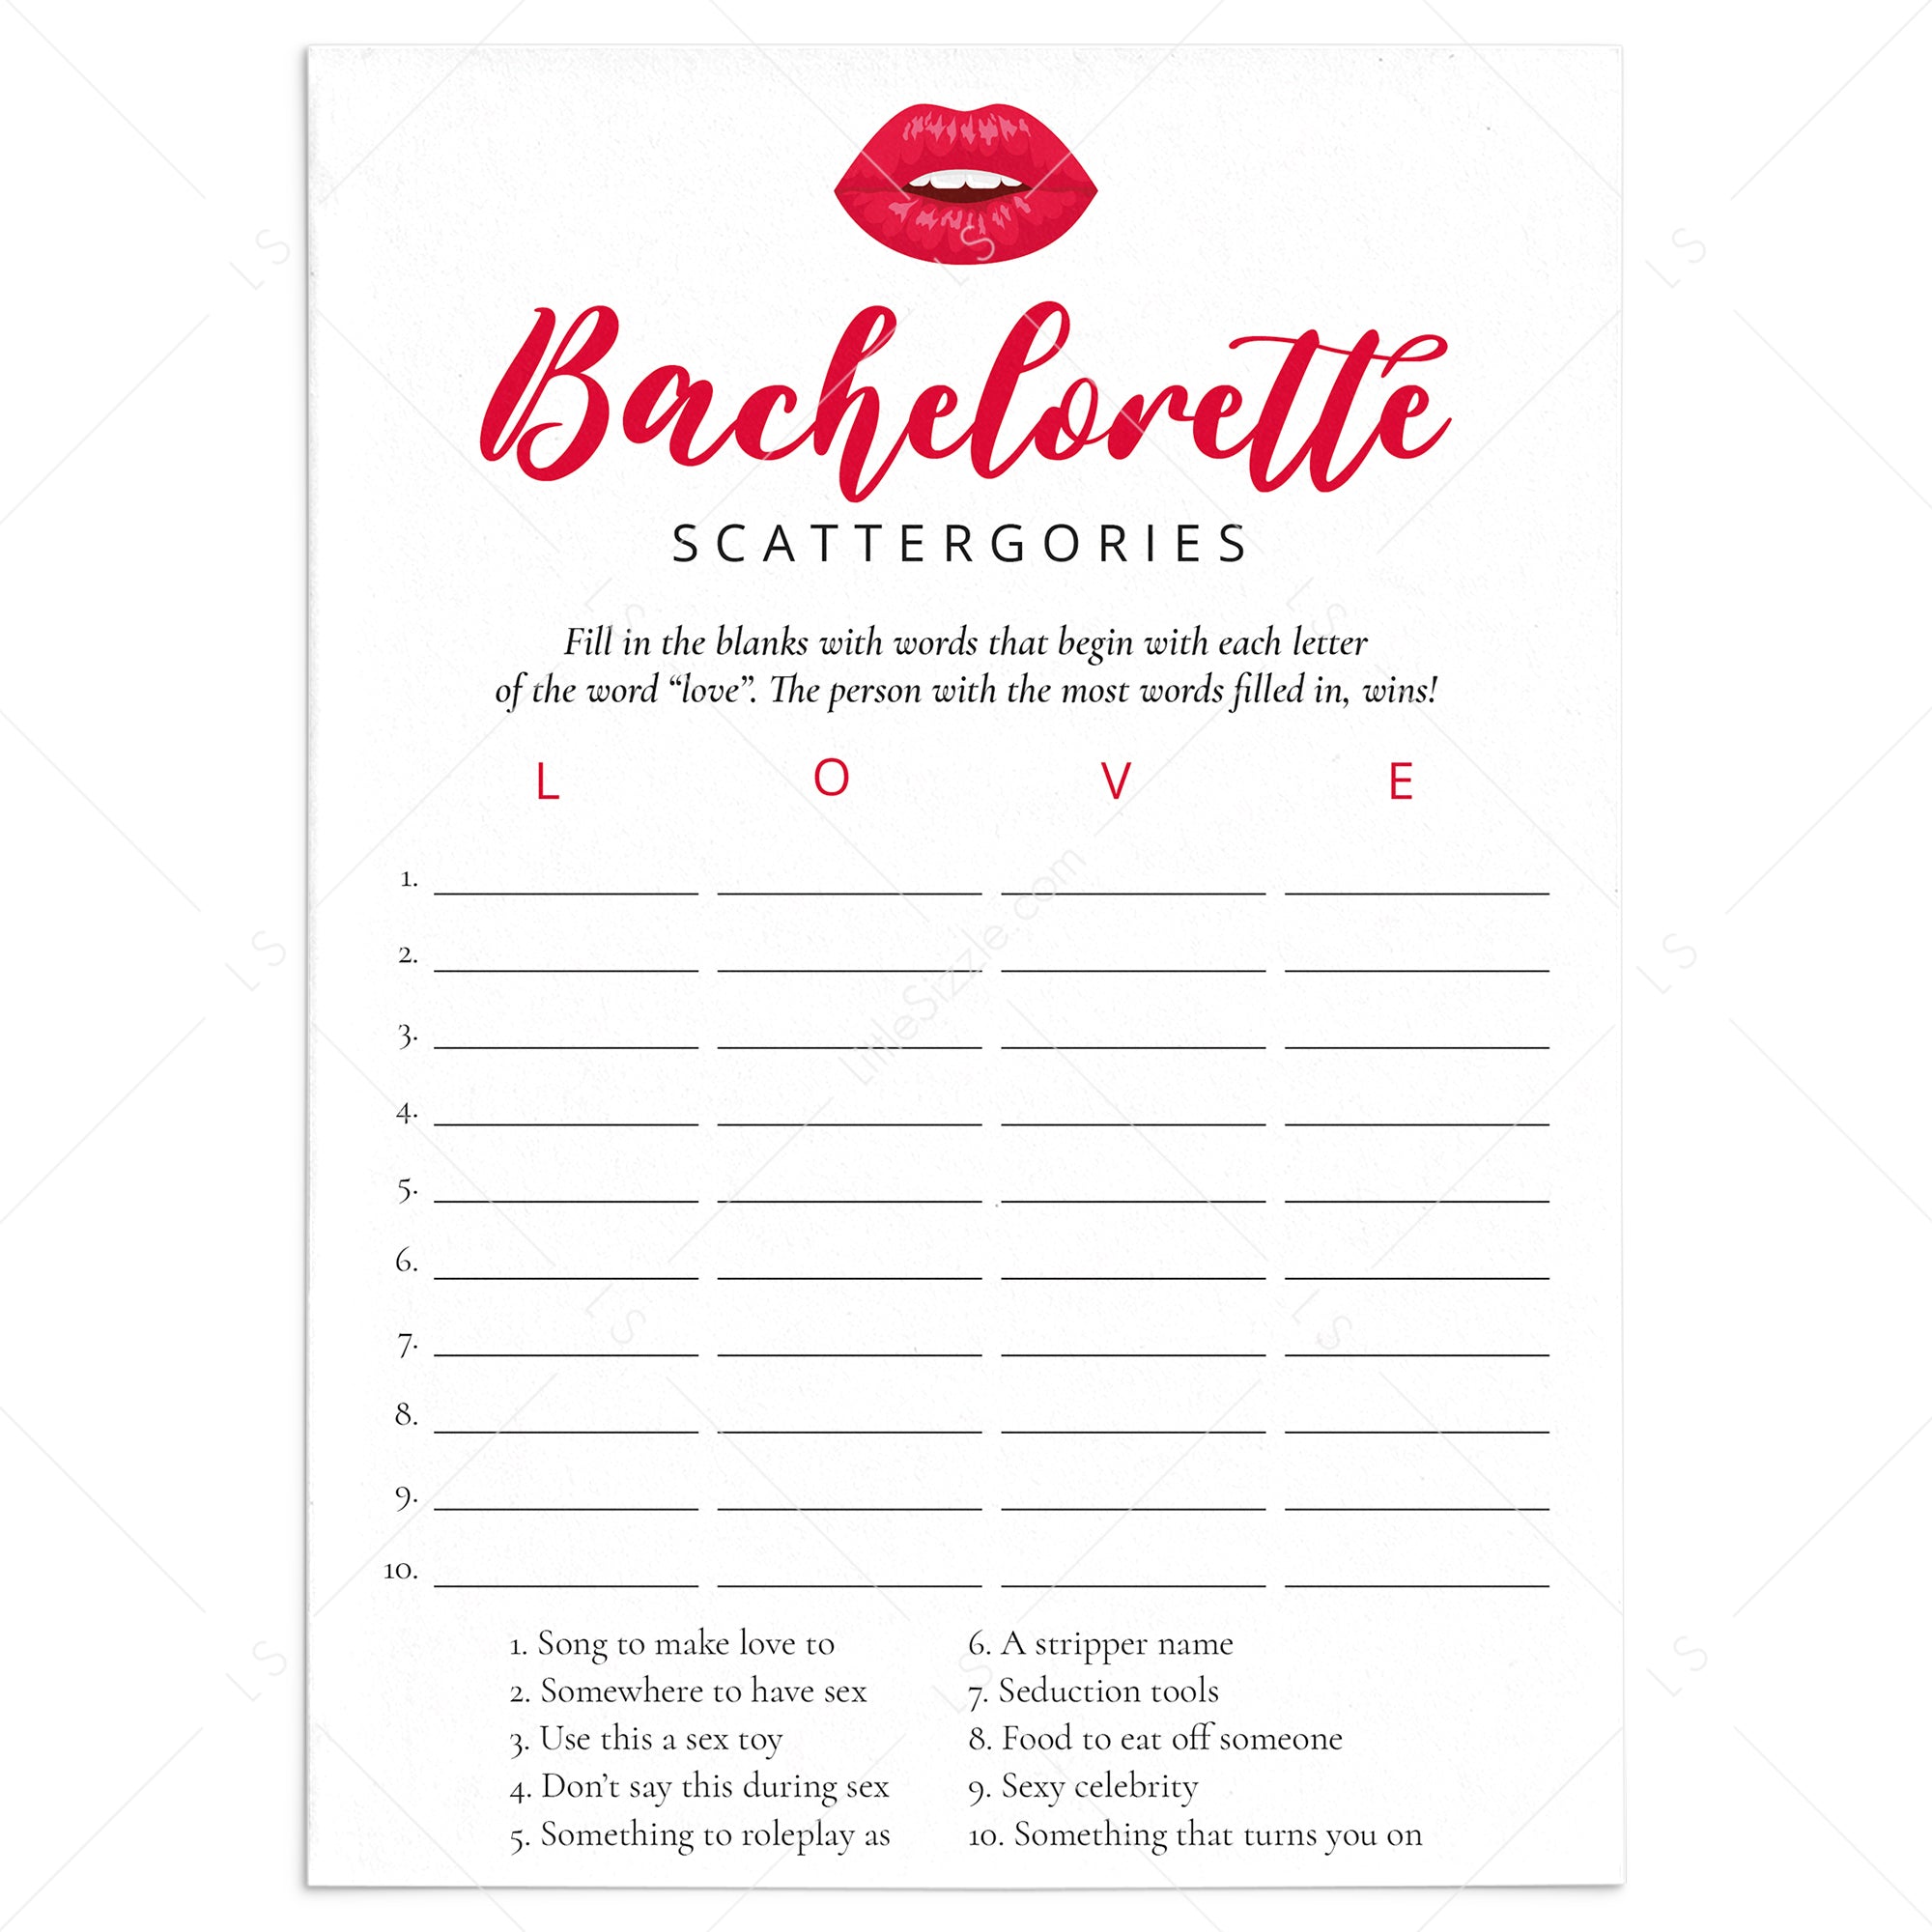 Red Bachelorette Party Game Scattergories Printable picture